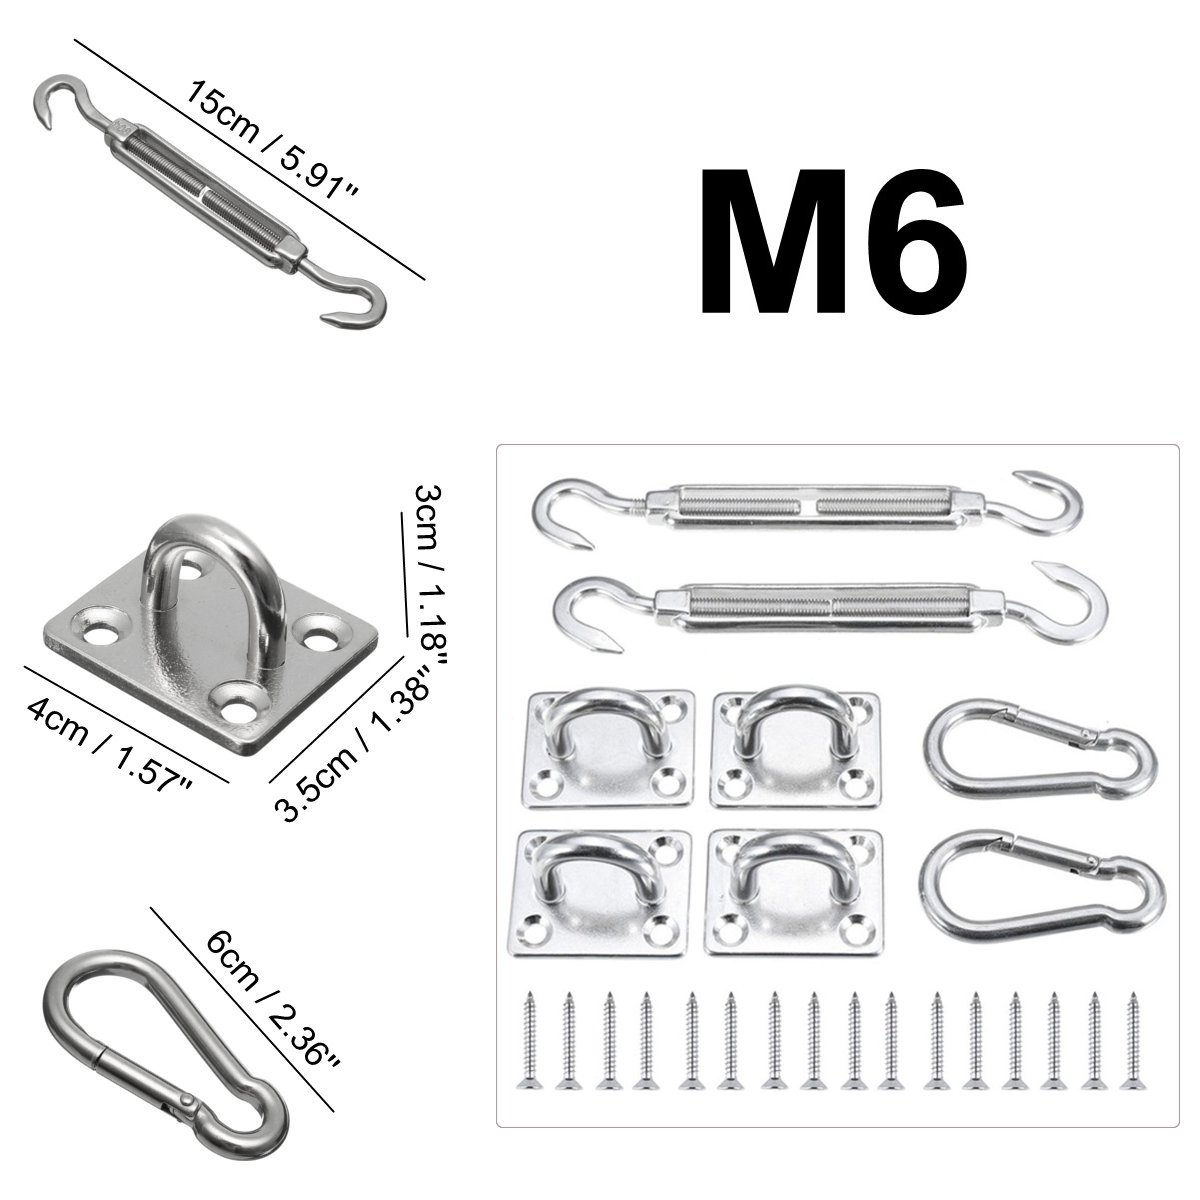 Mounting-Screw-Stainless-Steel-Sun-Sail-Shade-Canopy-Fixing-Fittings-Hardware-Accessory-Kit-1564445